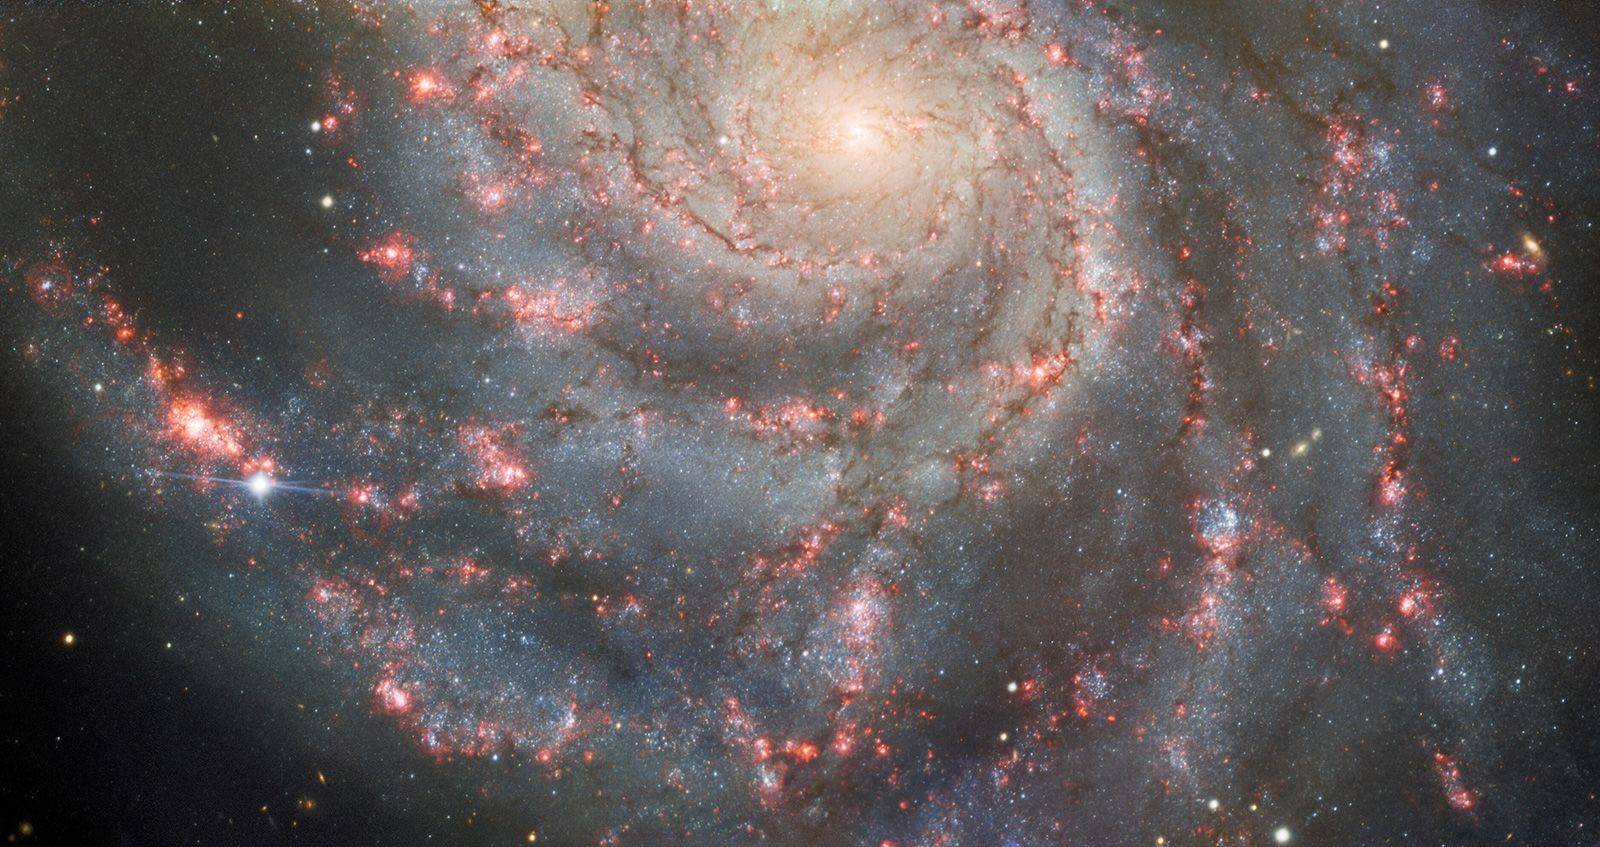 Hawaii observatory detects a starburst in the “Pinwheel” galaxy